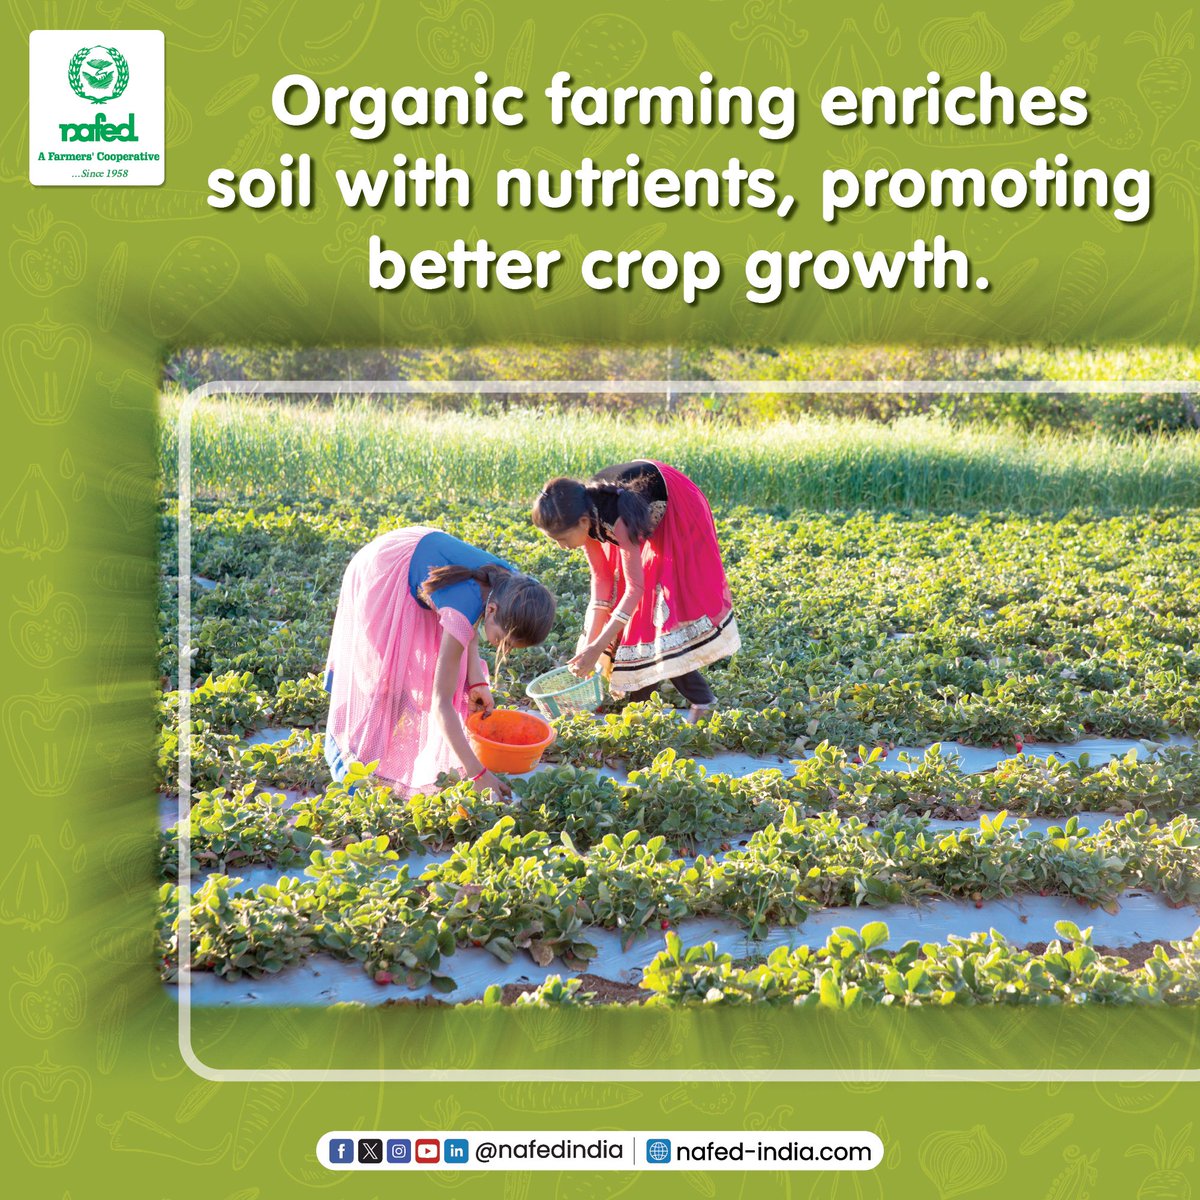 Grow better crops with nature! Organic farming boosts soil nutrients for healthier crop. No synthetic chemicals, just compost and crop rotation for sustainable, nutritious harvests. 

#NAFED #NAFEDIndia #Farmers #Sustainability #gogreengonafed #agriculture #organicfarming…